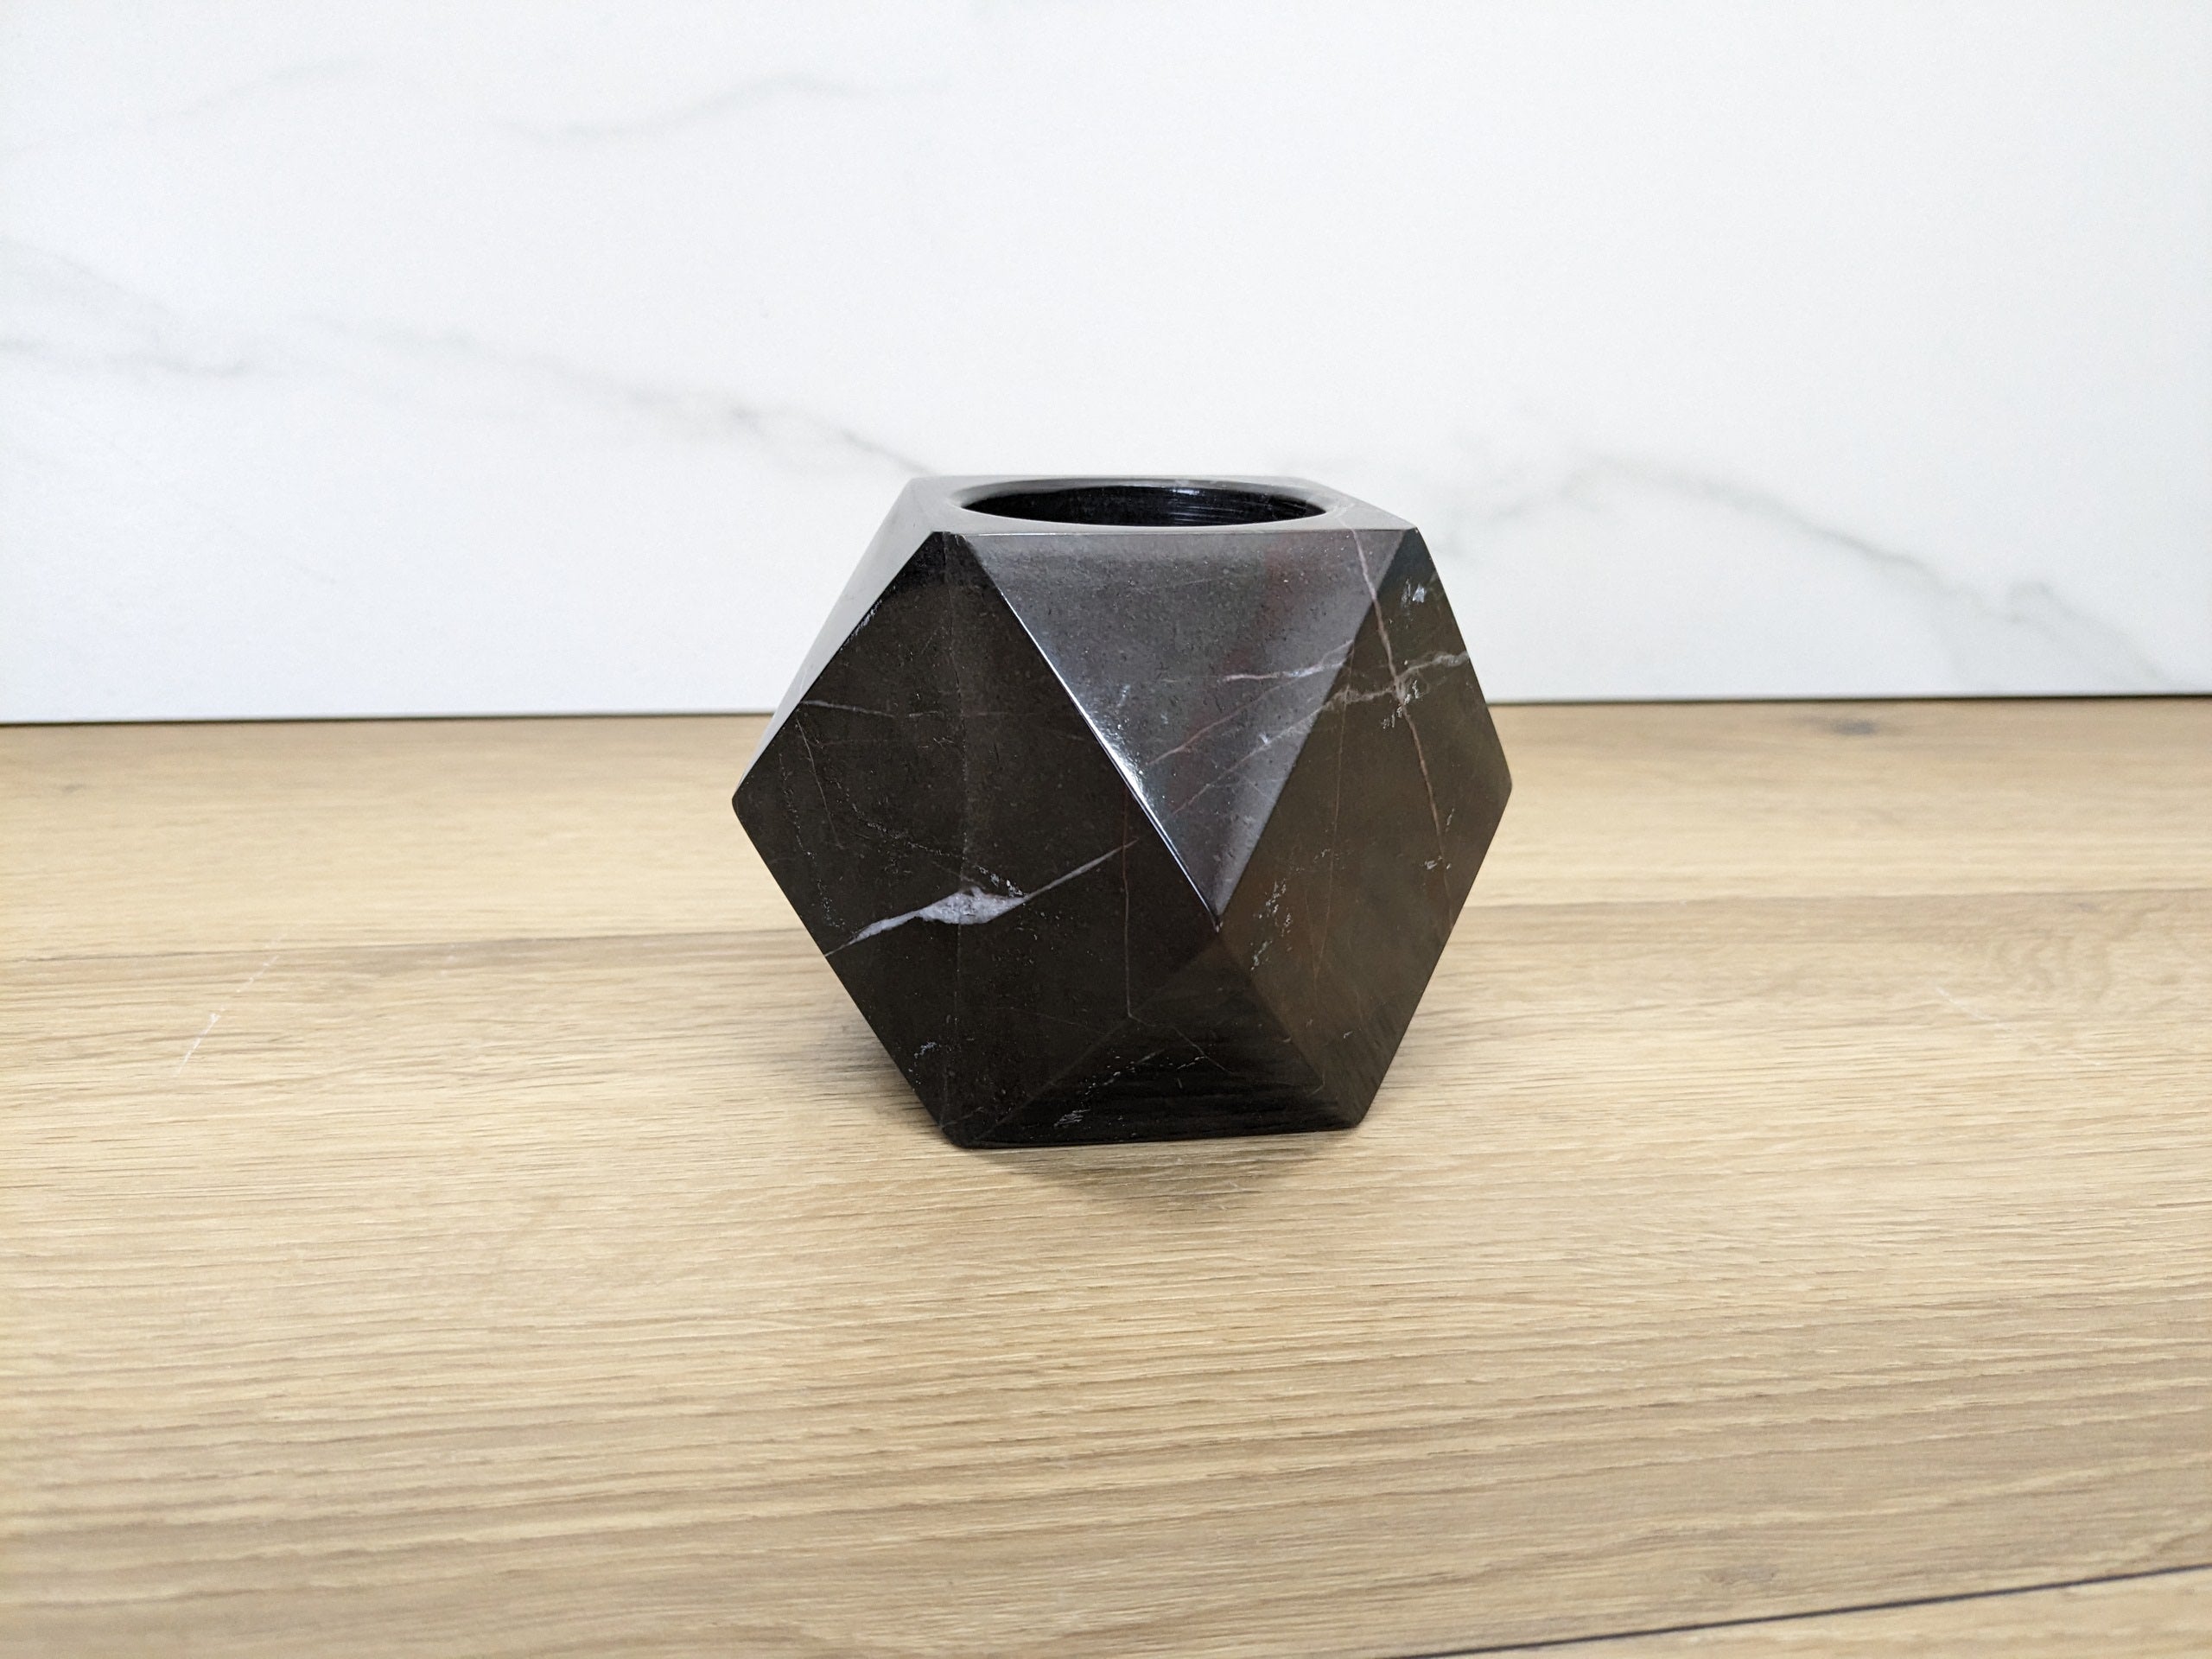 Black Onyx Stone Mini Planter. One of a kind. Handcarved in Mexico. We package and ship from the USA. Buy now at www.felipeandgrace.com.